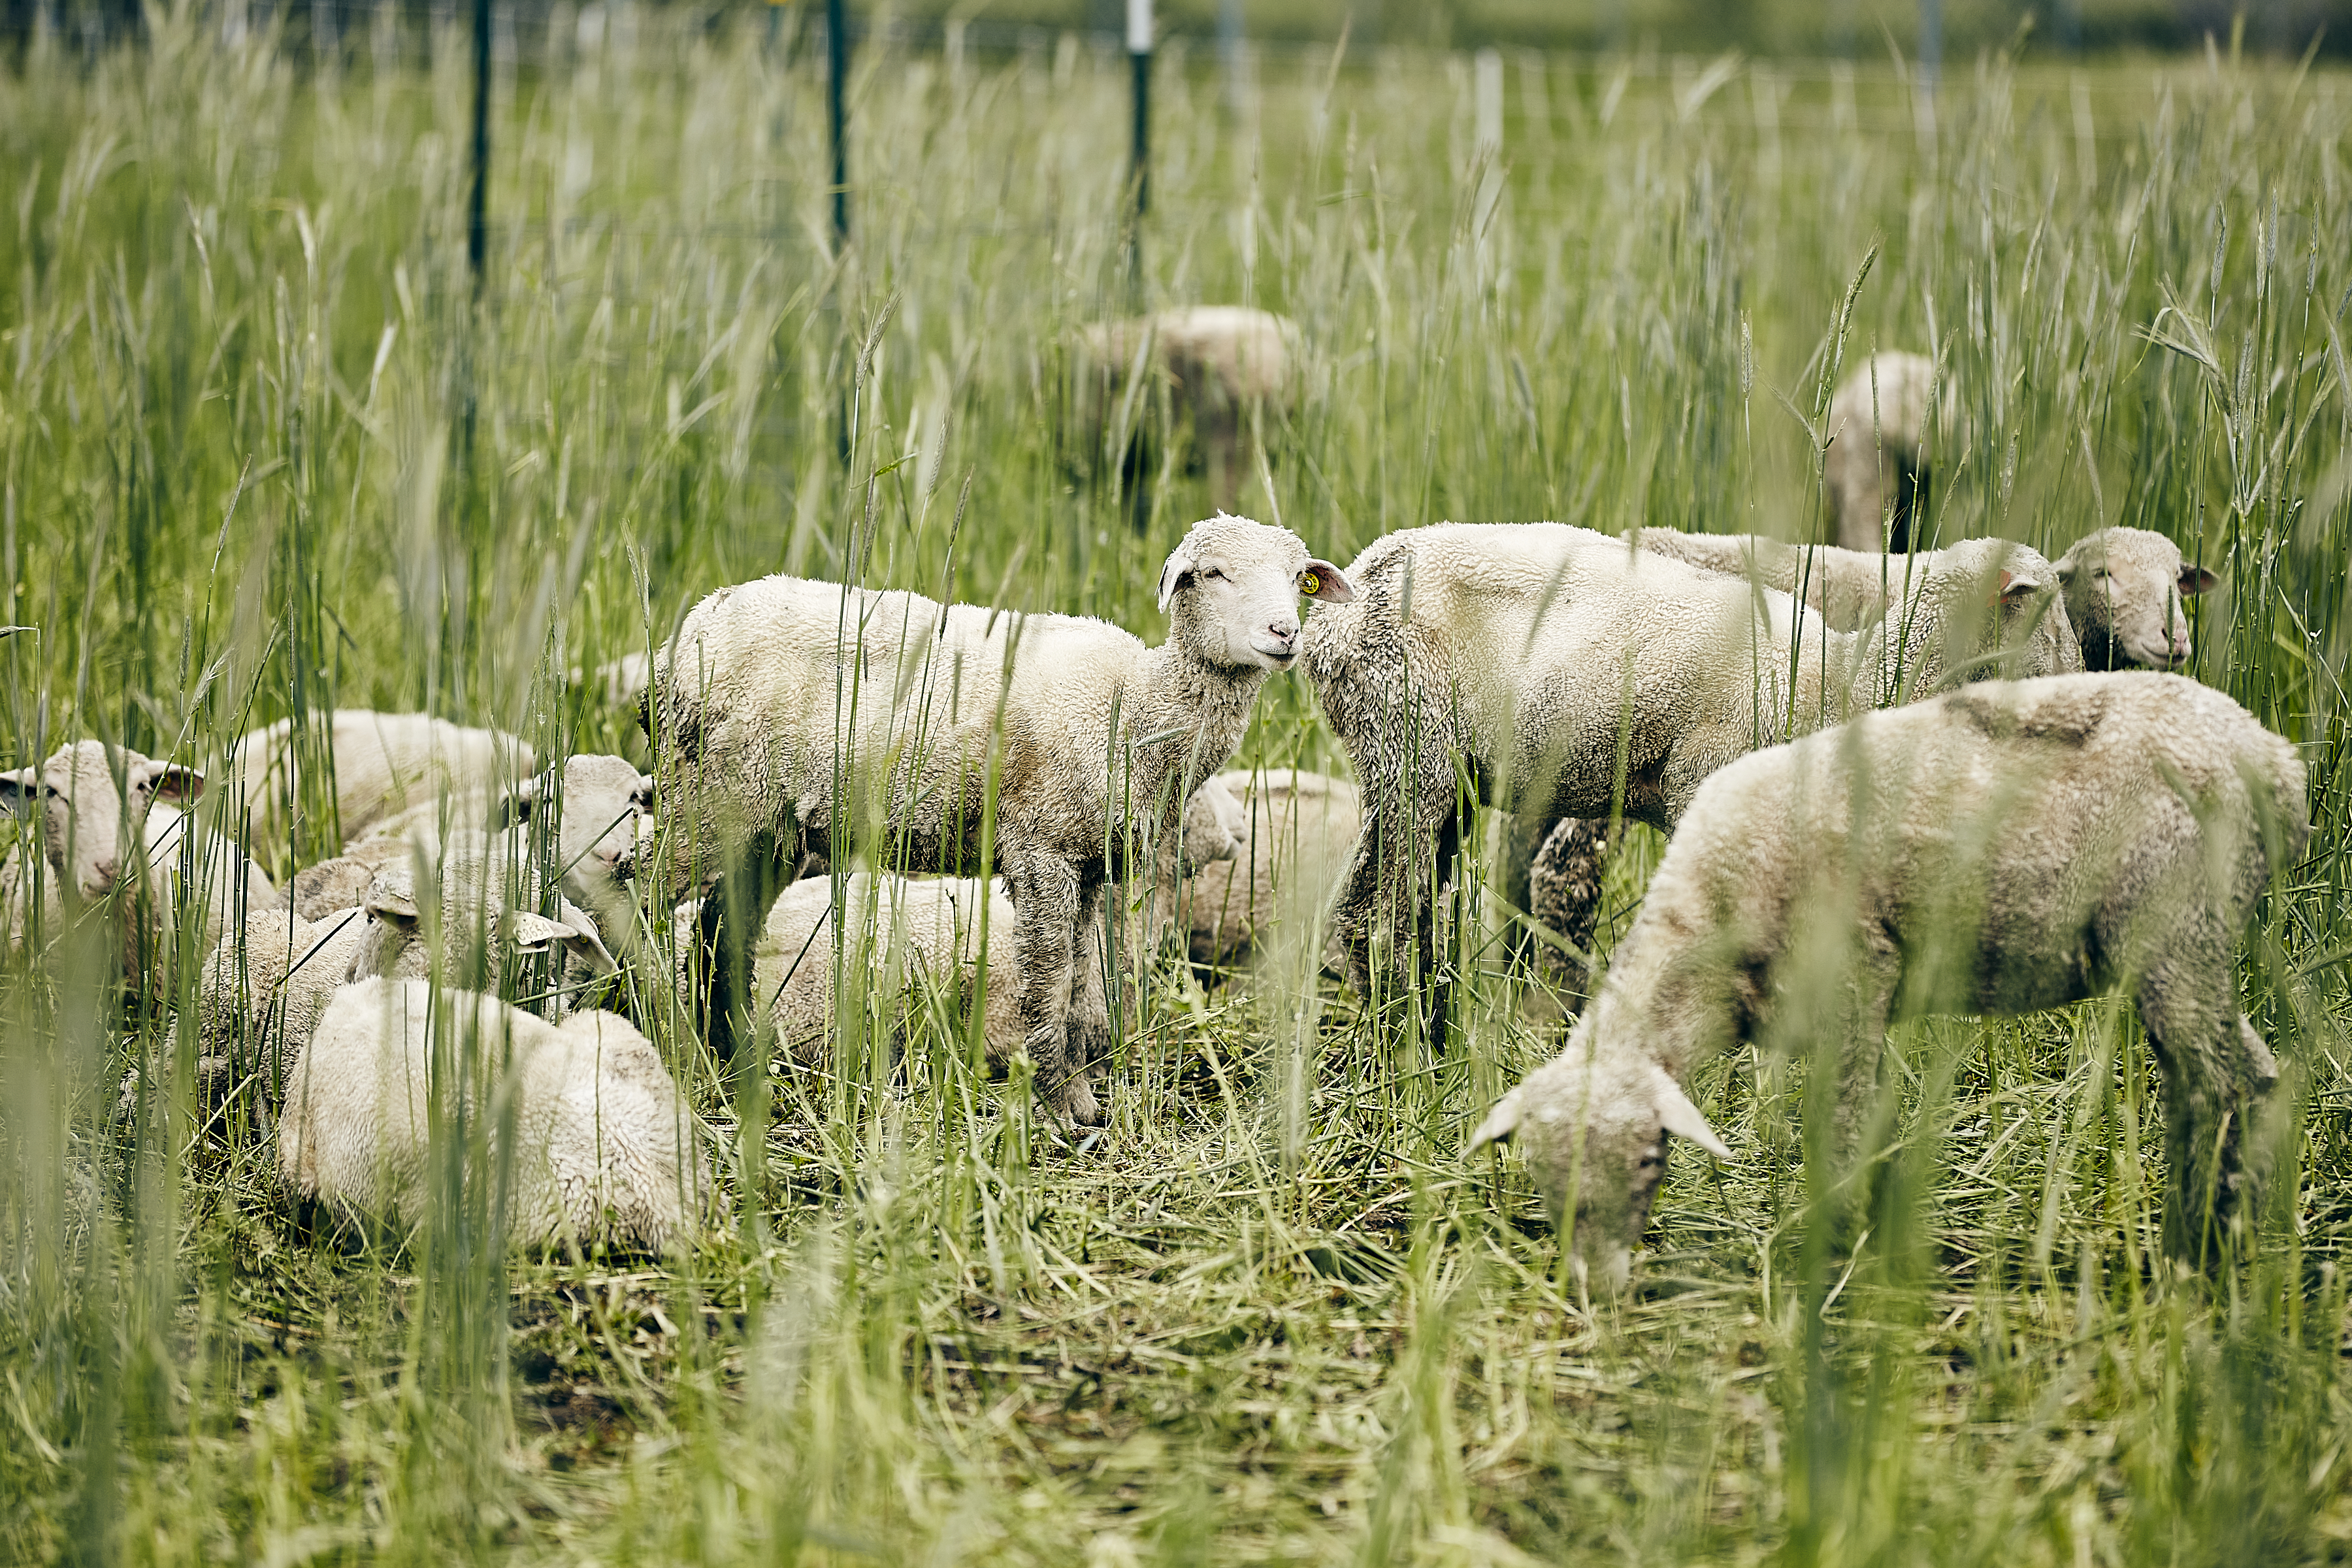 sheep are grazing in a field